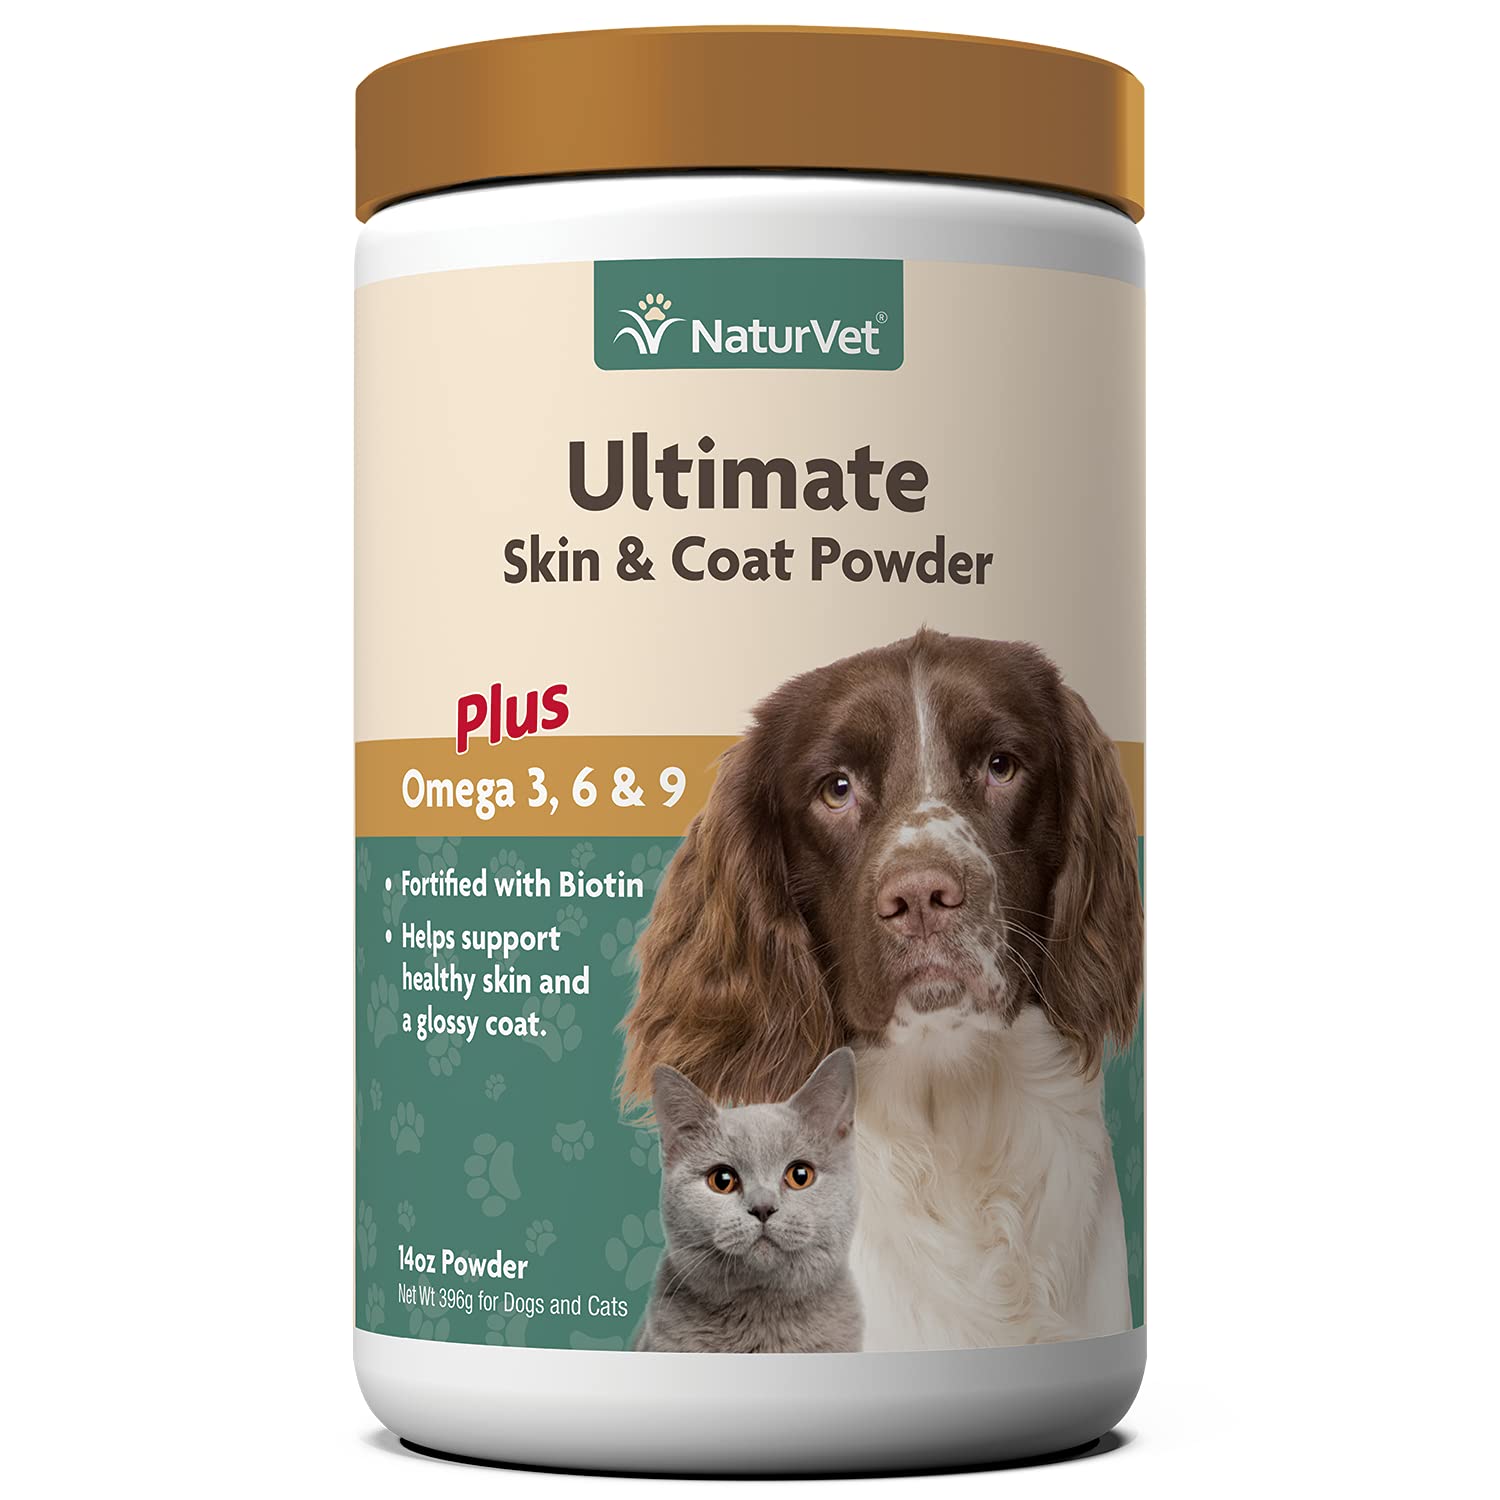 NaturVet Ultimate Skin and Coat Powder Plus Omega 3, 6 and 9 Supplement for Dogs and Cats, Powder, Made in The USA with Globally Source Ingredients 14 Ounce画像